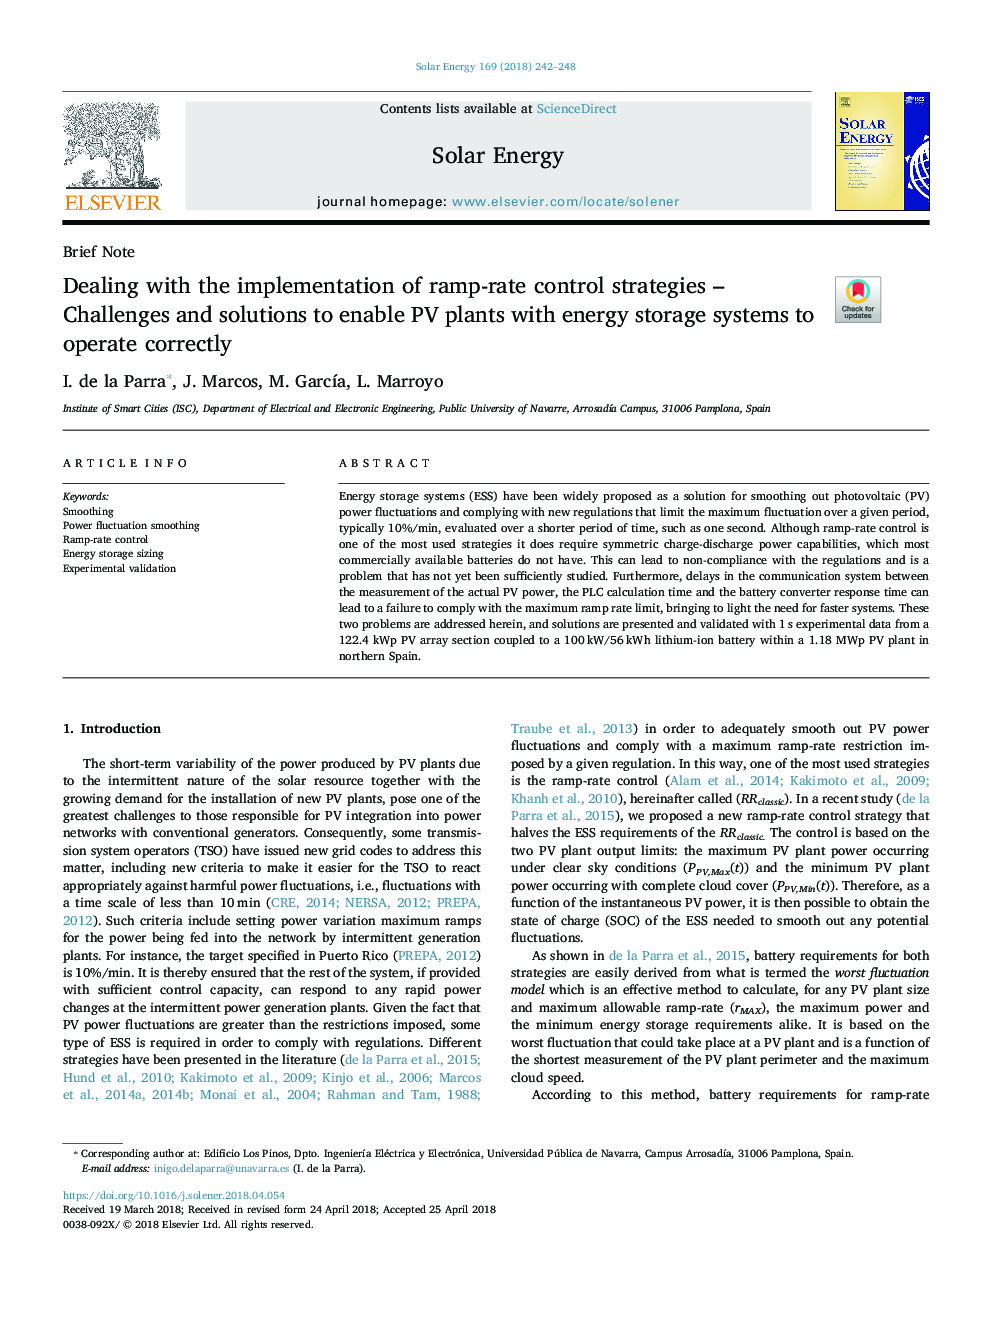 Dealing with the implementation of ramp-rate control strategies - Challenges and solutions to enable PV plants with energy storage systems to operate correctly